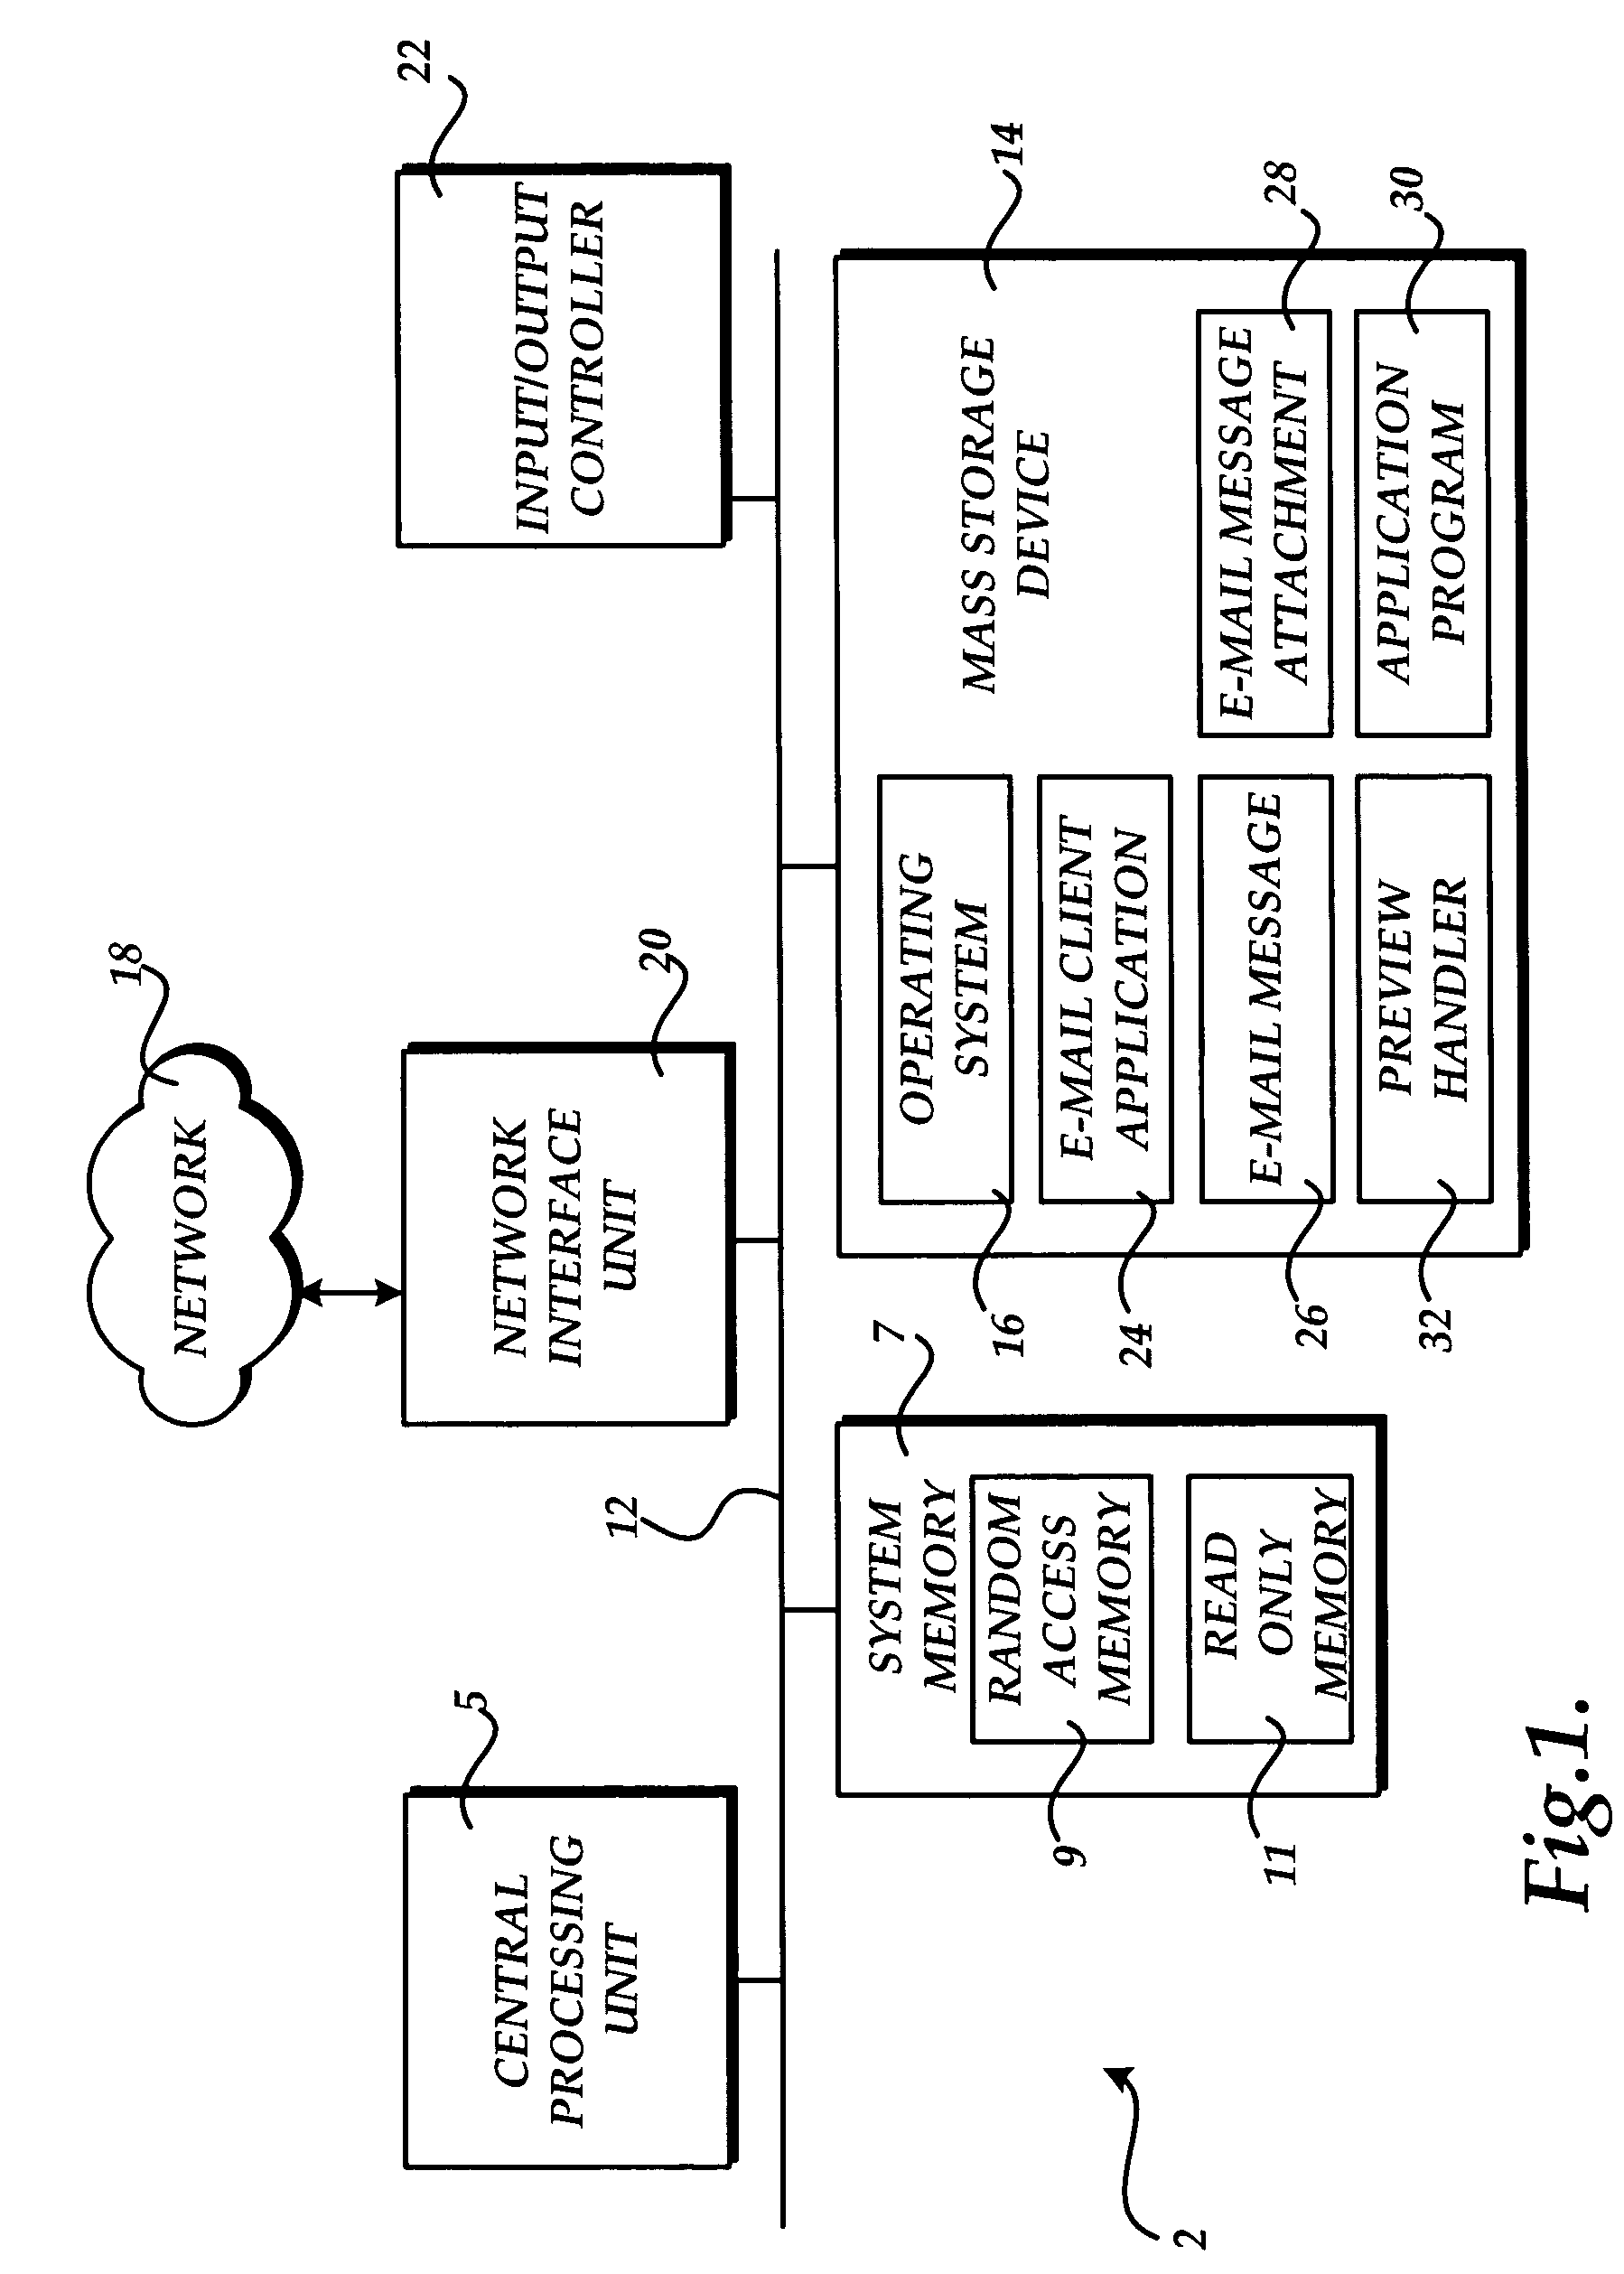 Method and computer-readable medium for navigating between attachments to electronic mail messages